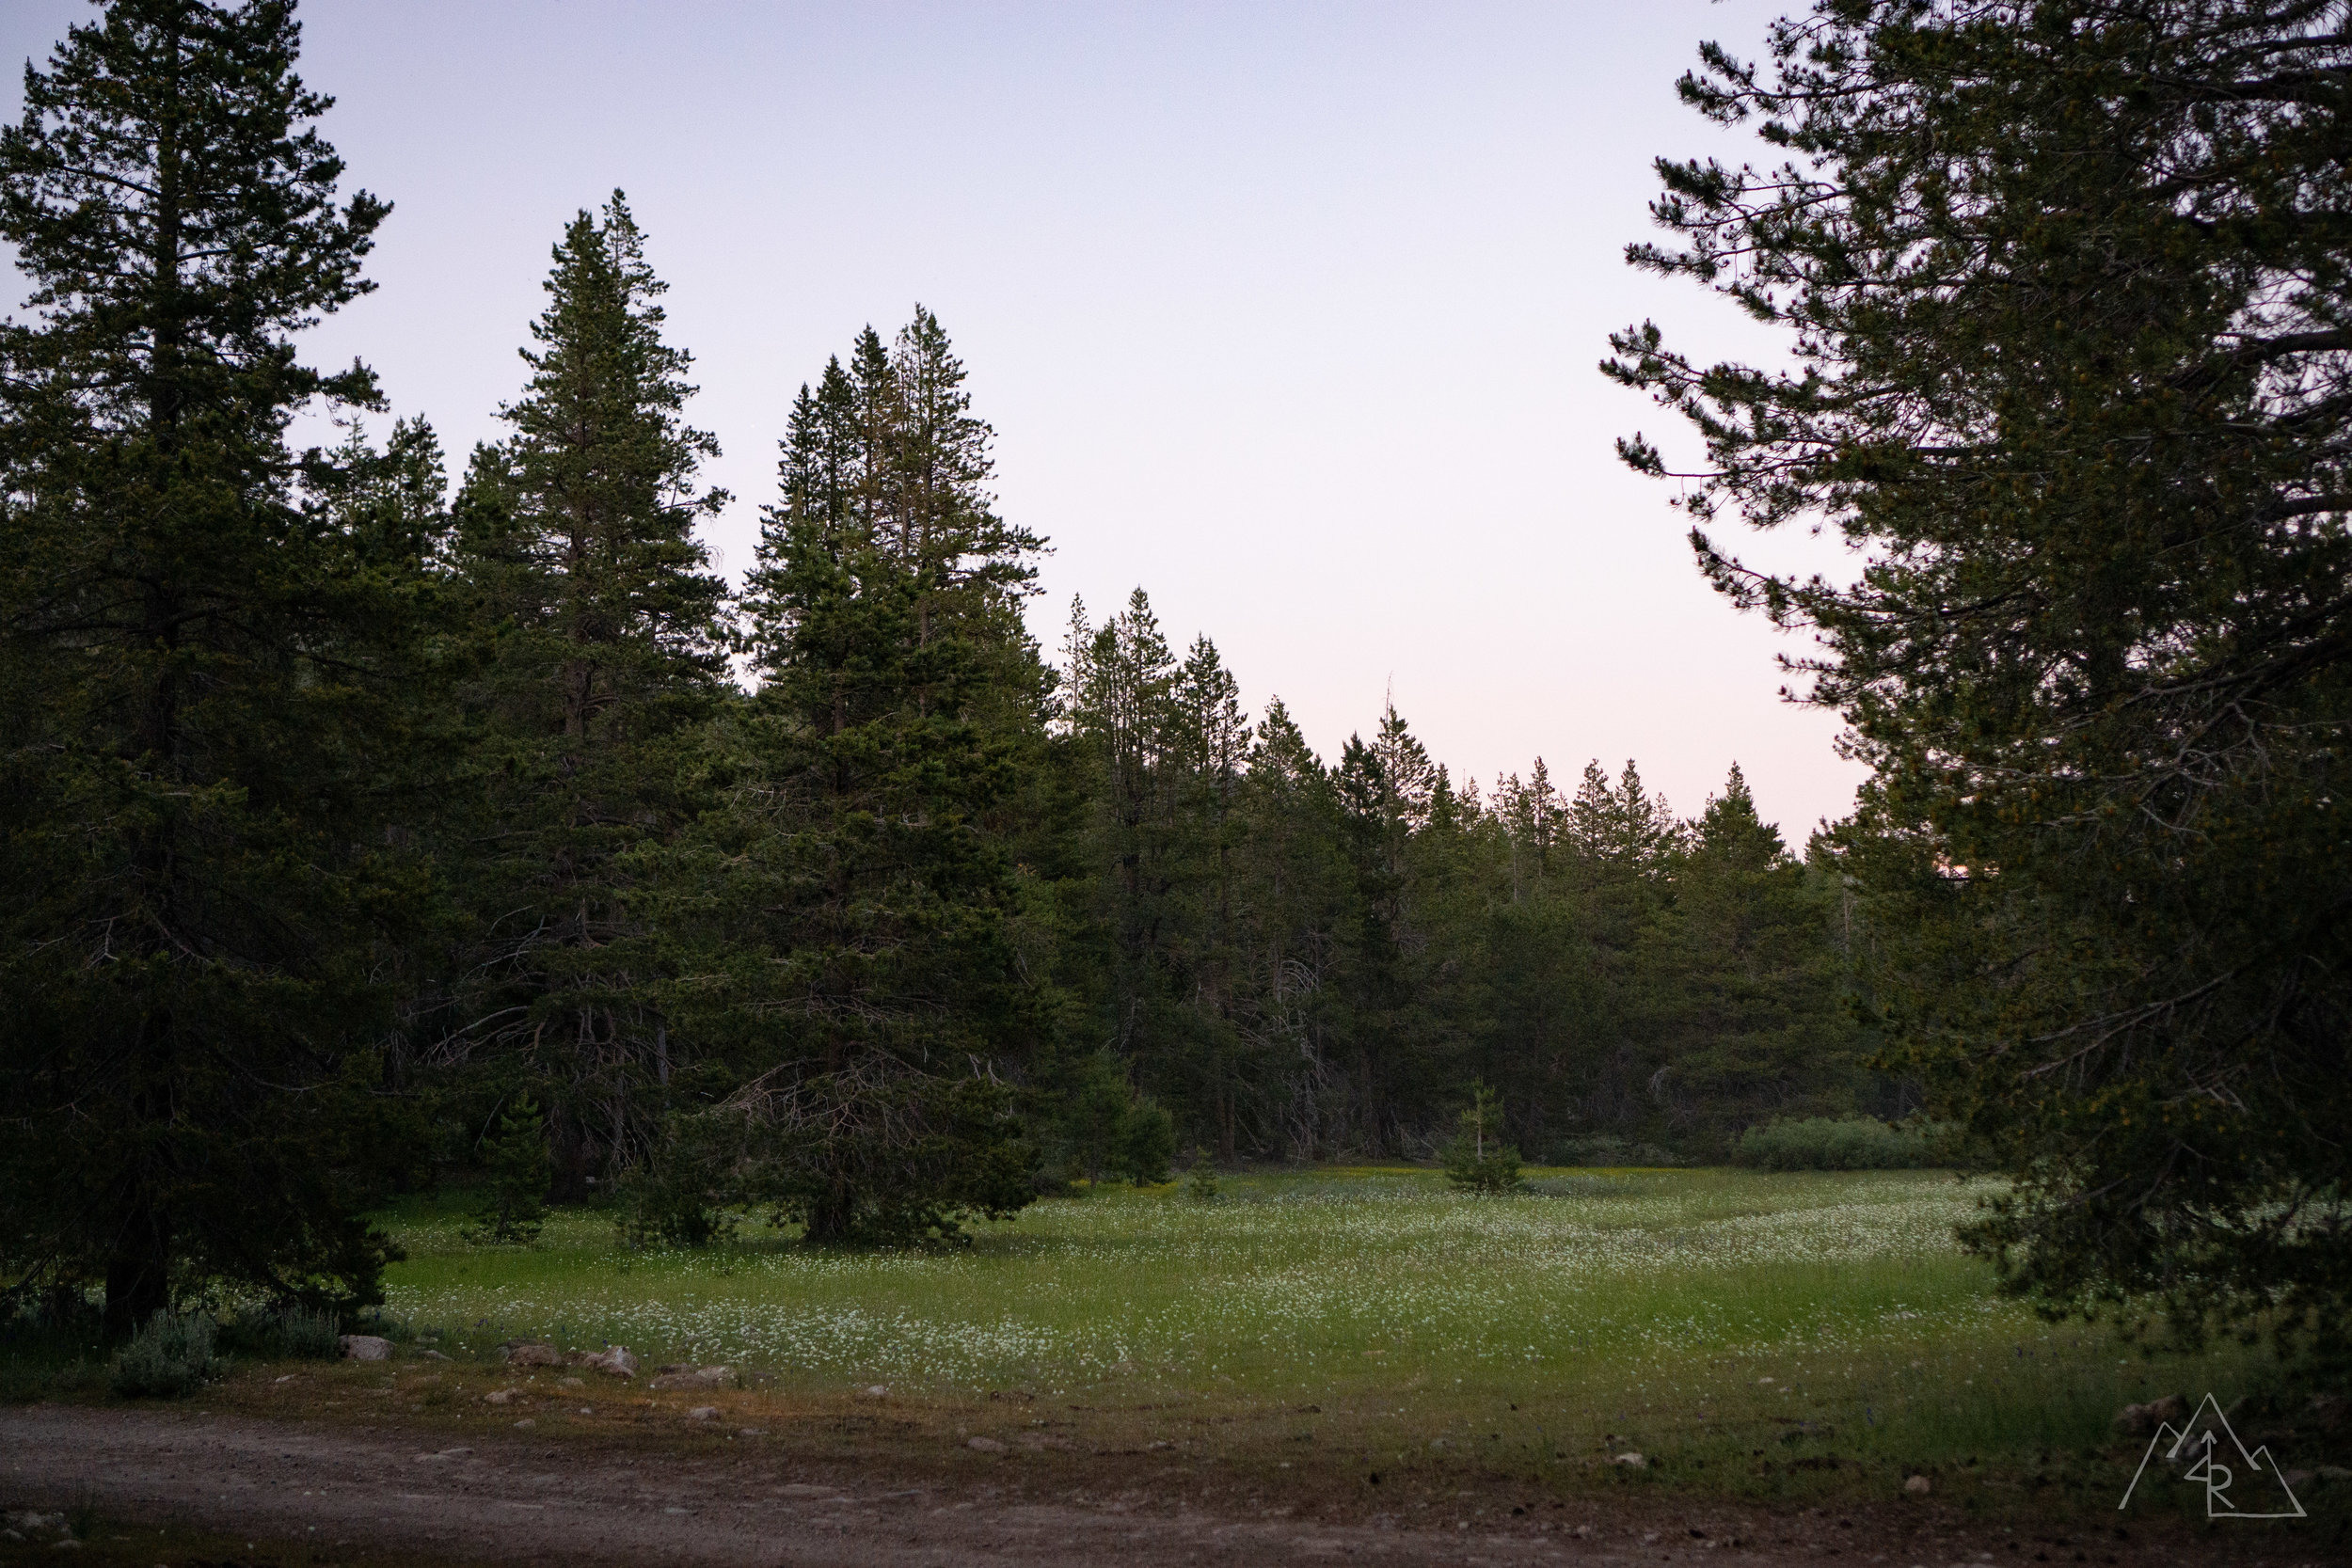 MosquitoCamping_072019-65.jpg